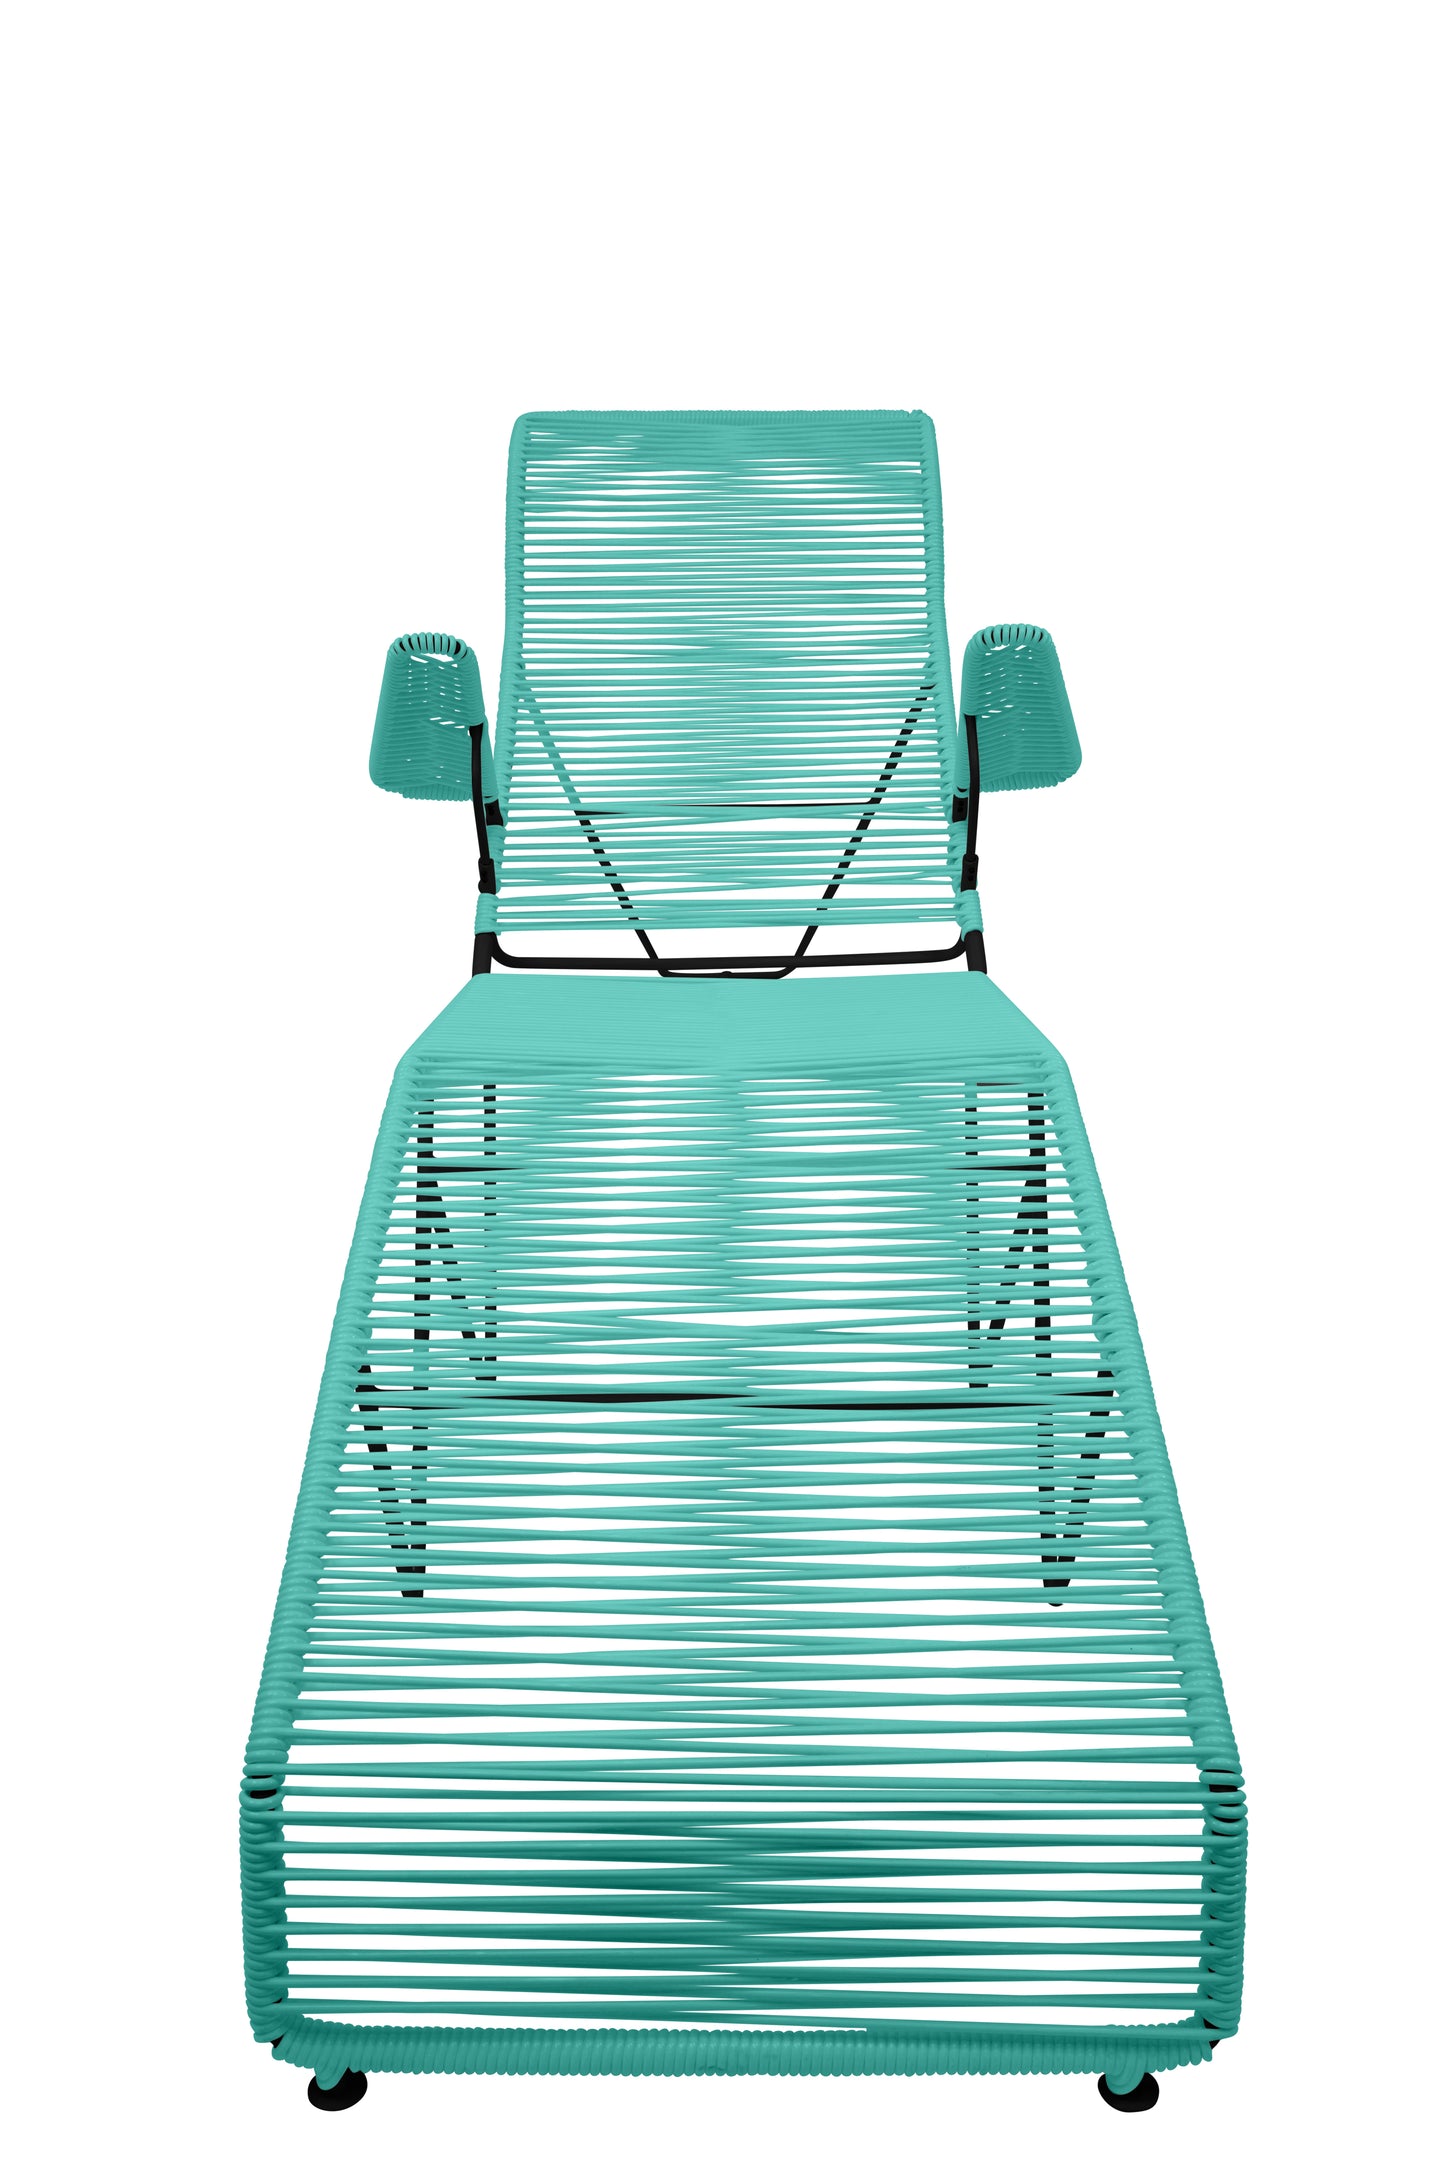 Asereno Chaise Lounger